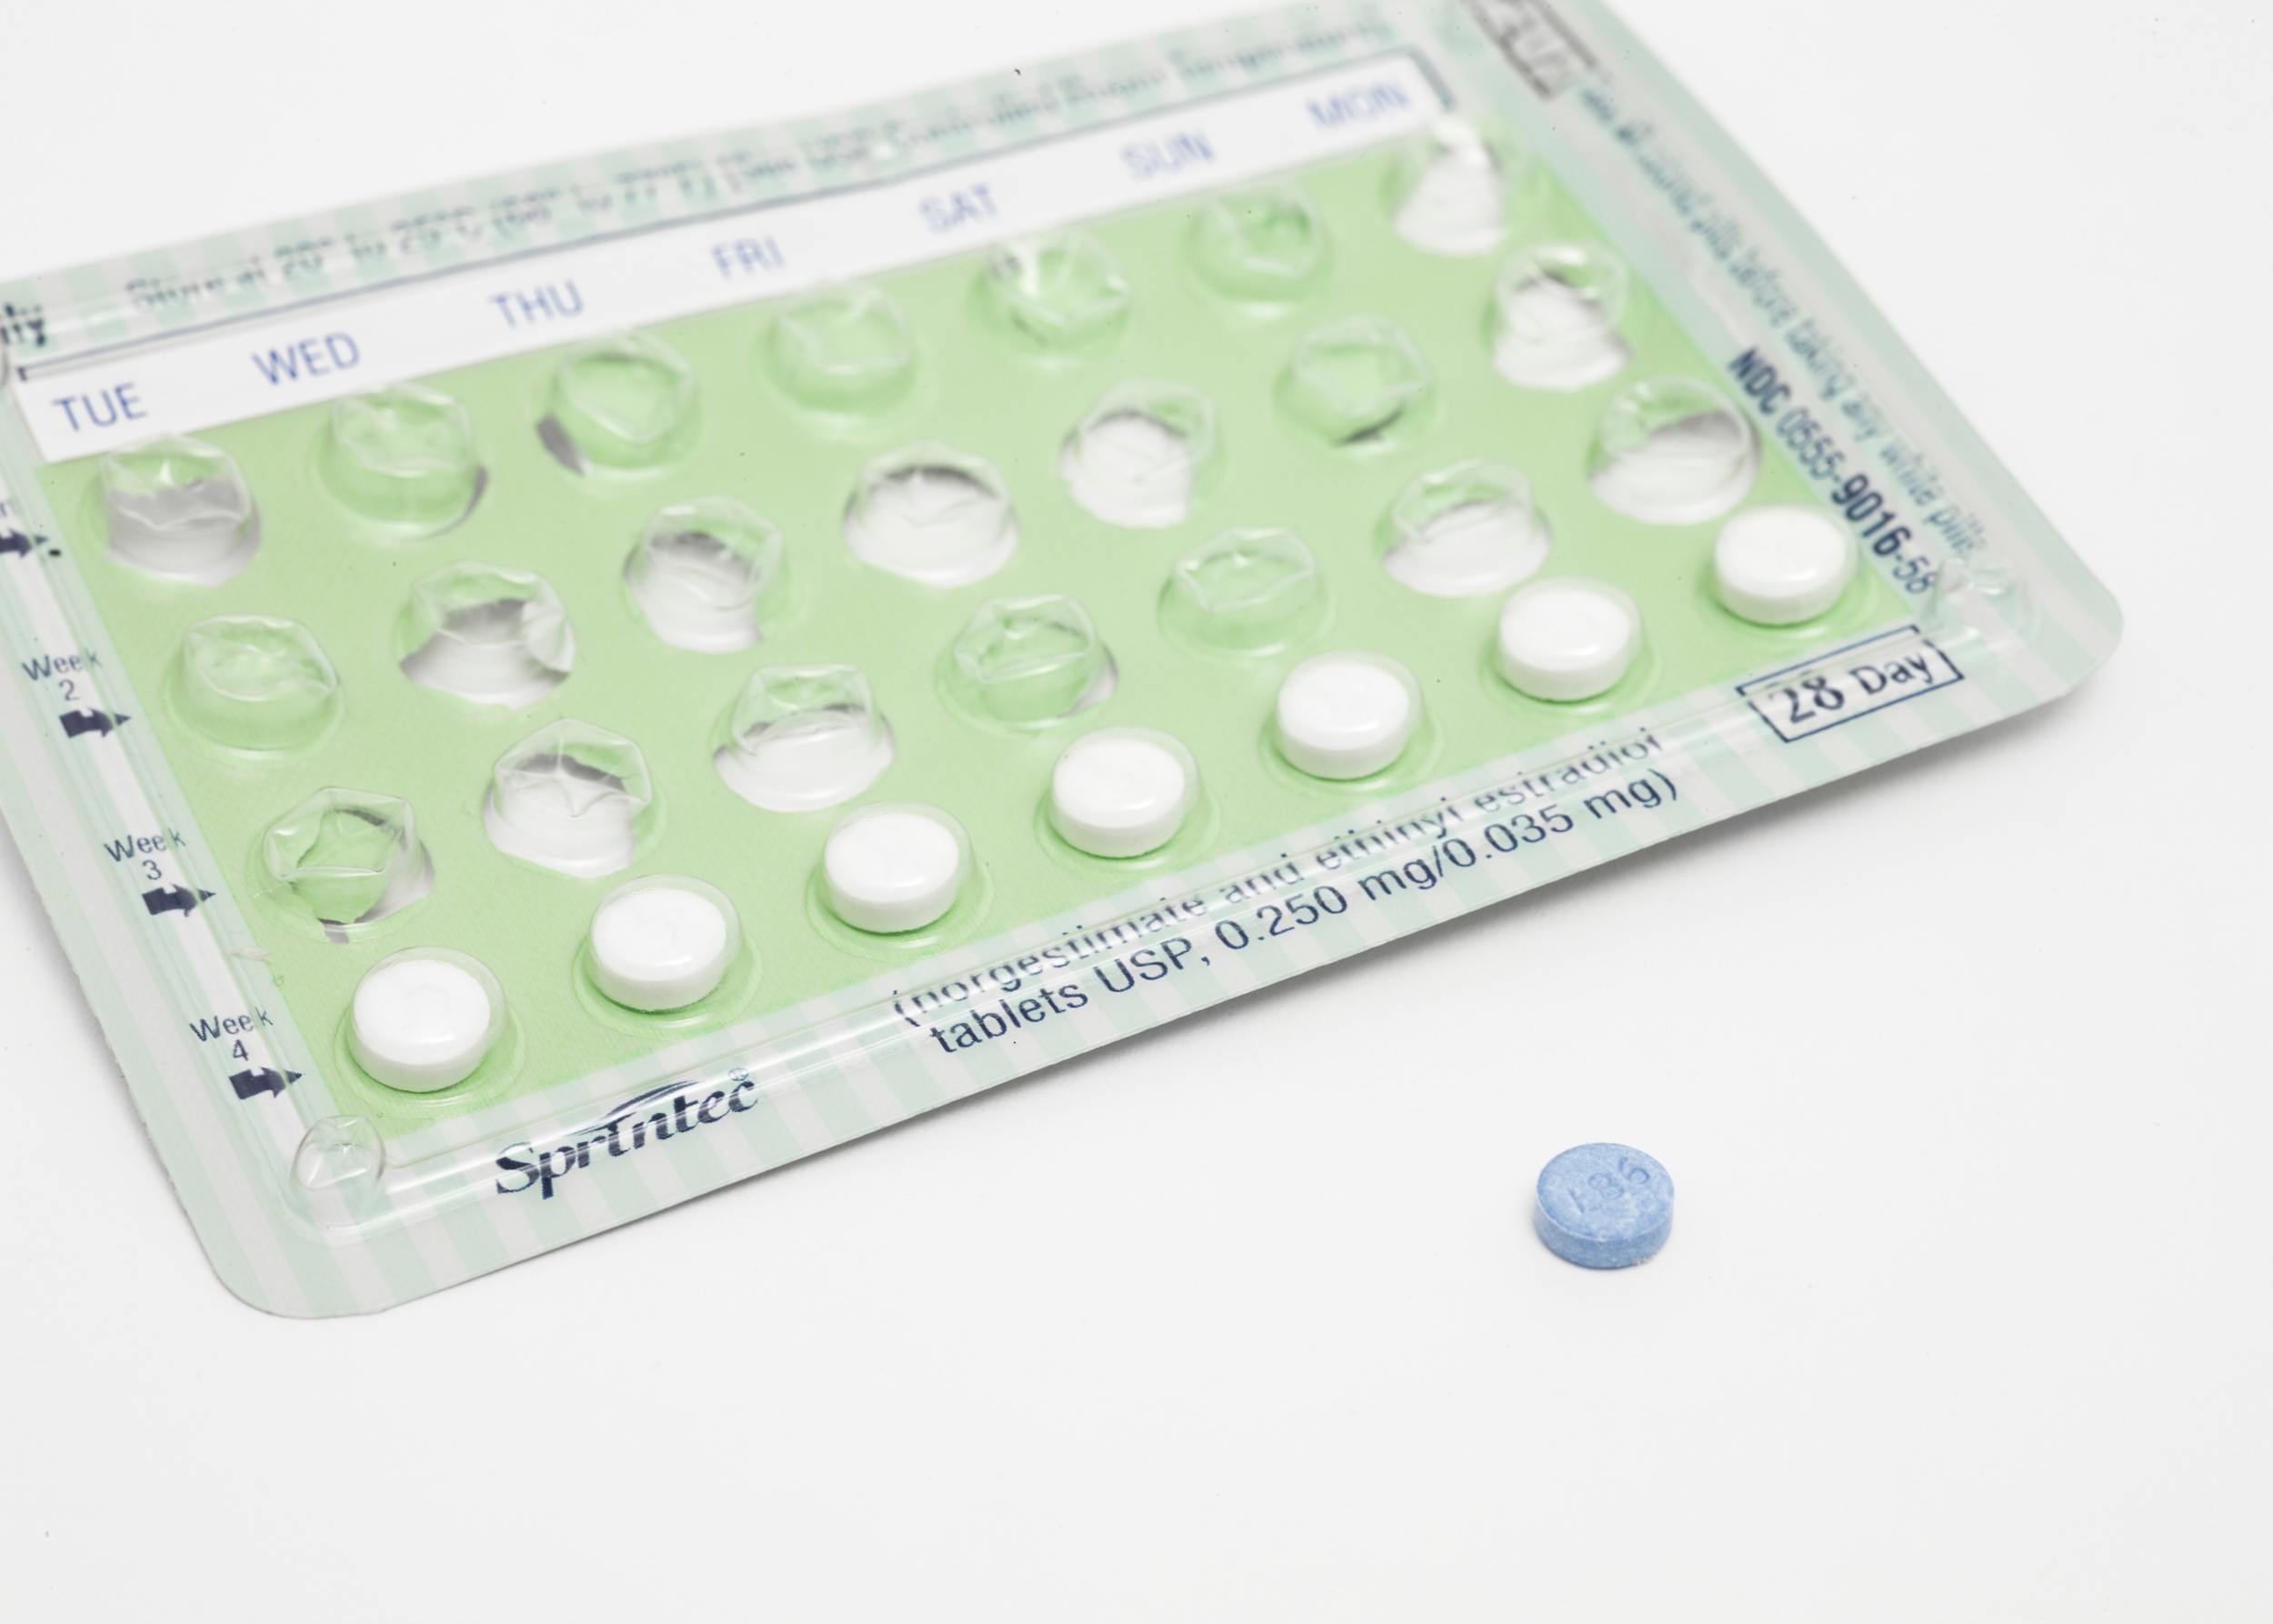 A pack of Birth Control Pills, often referred to as "The Pill"